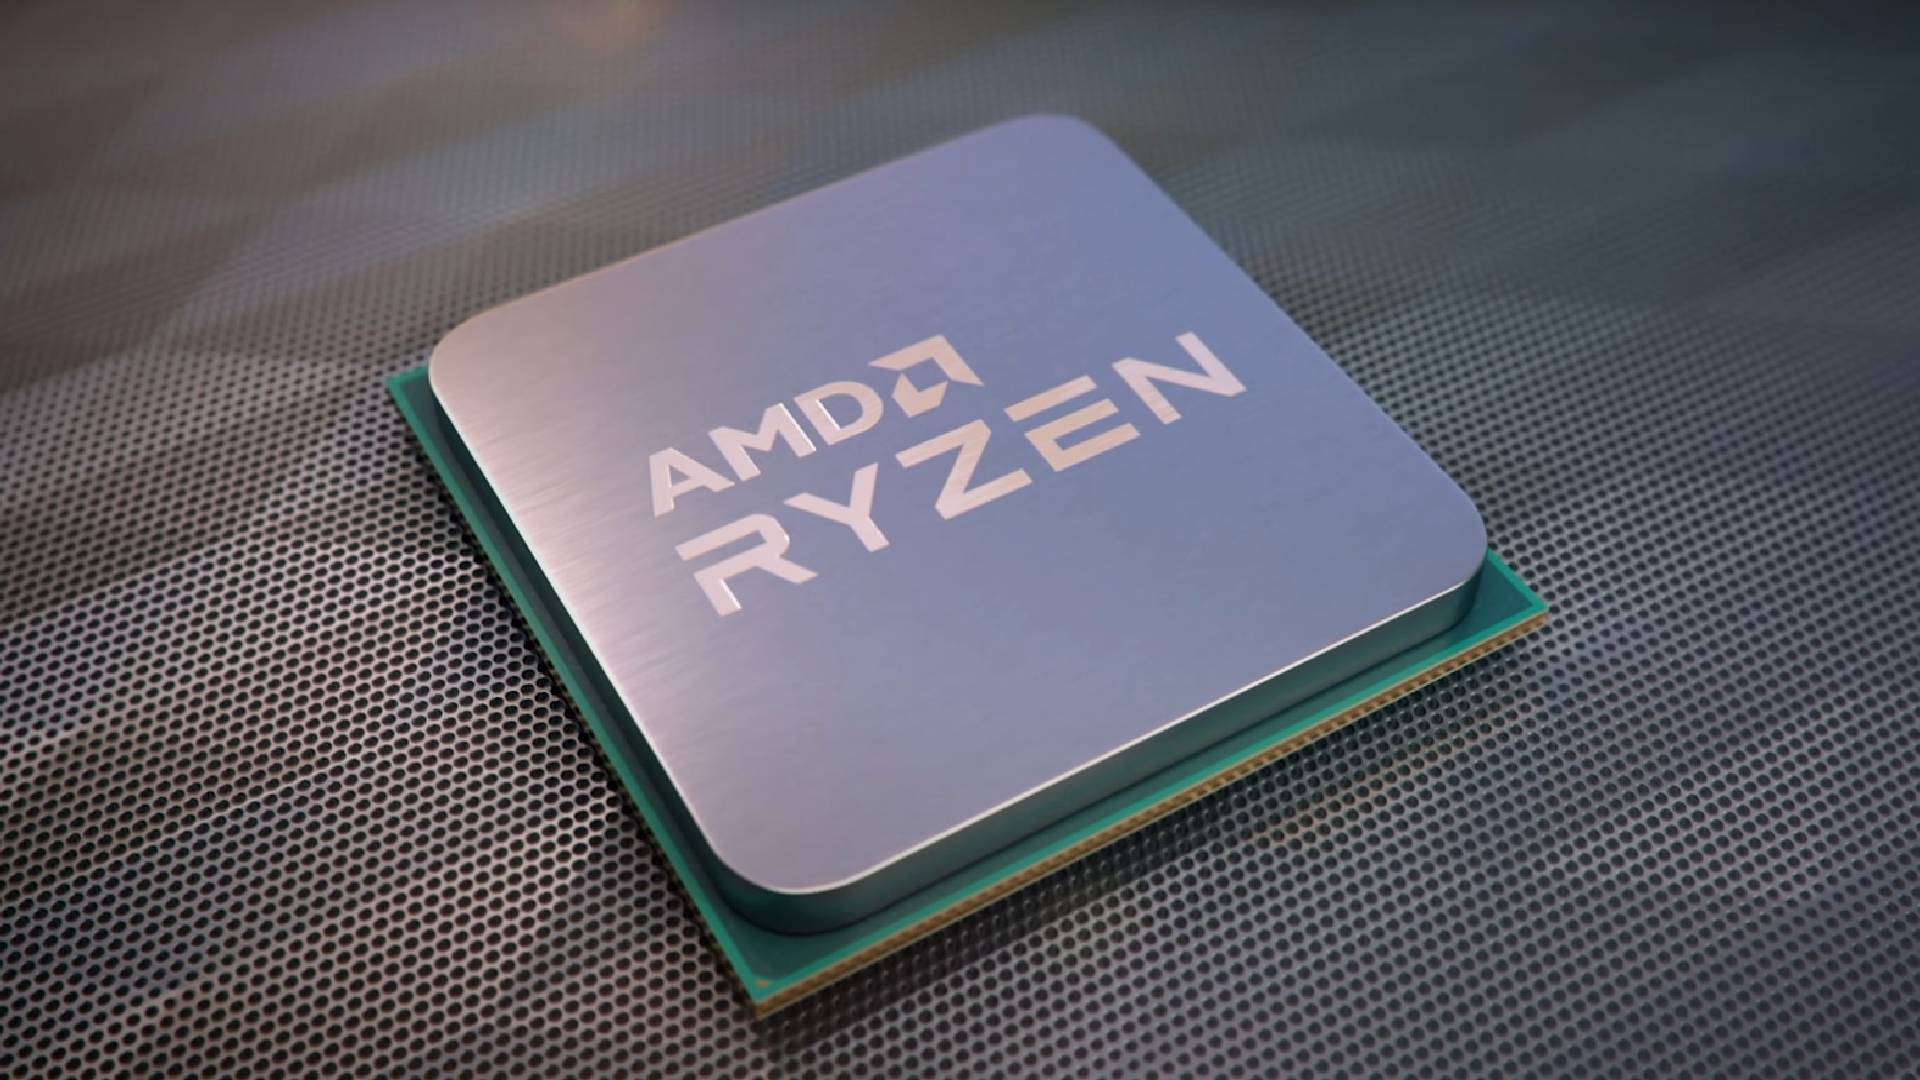 Upcoming AMD Zen 3+ APU could come out swinging against Intel's Xe iGPU